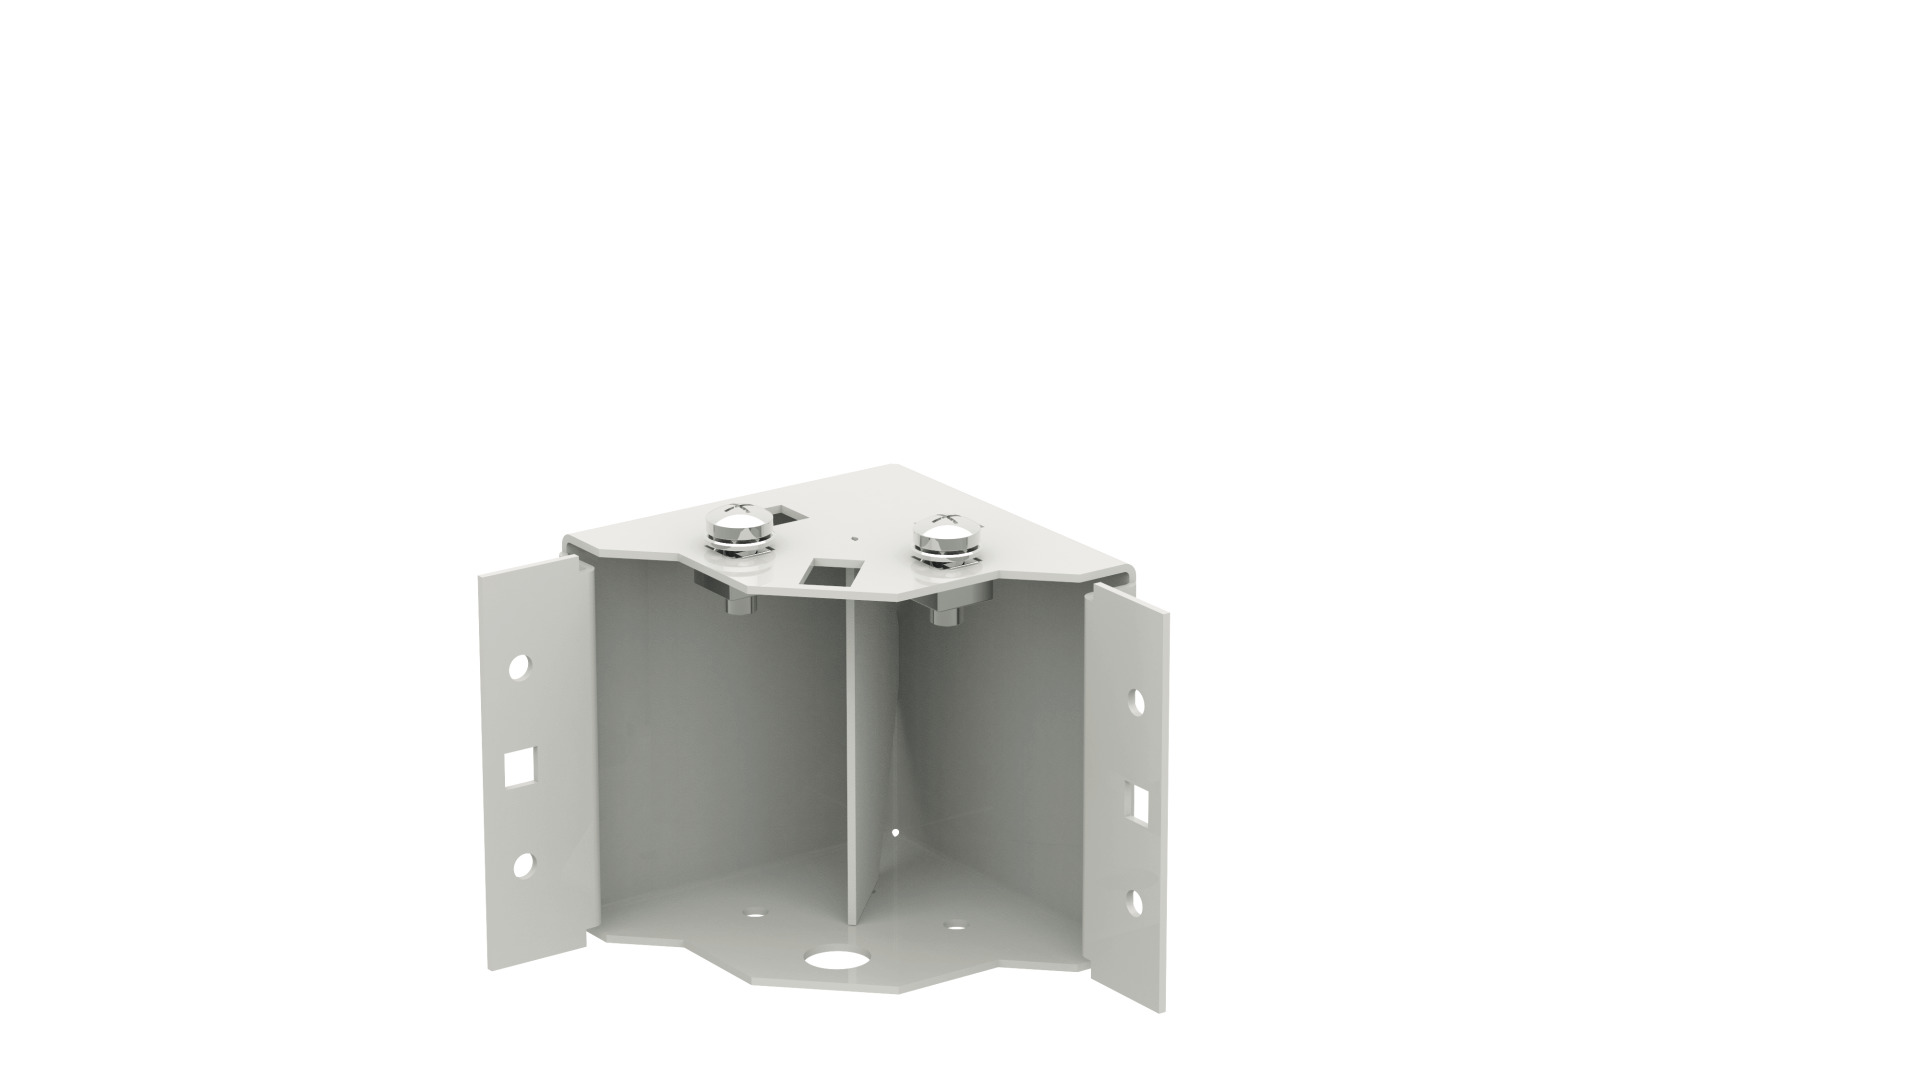 4 Plinth Corners for PRO, Fixed, H=100 mm, RAL9005